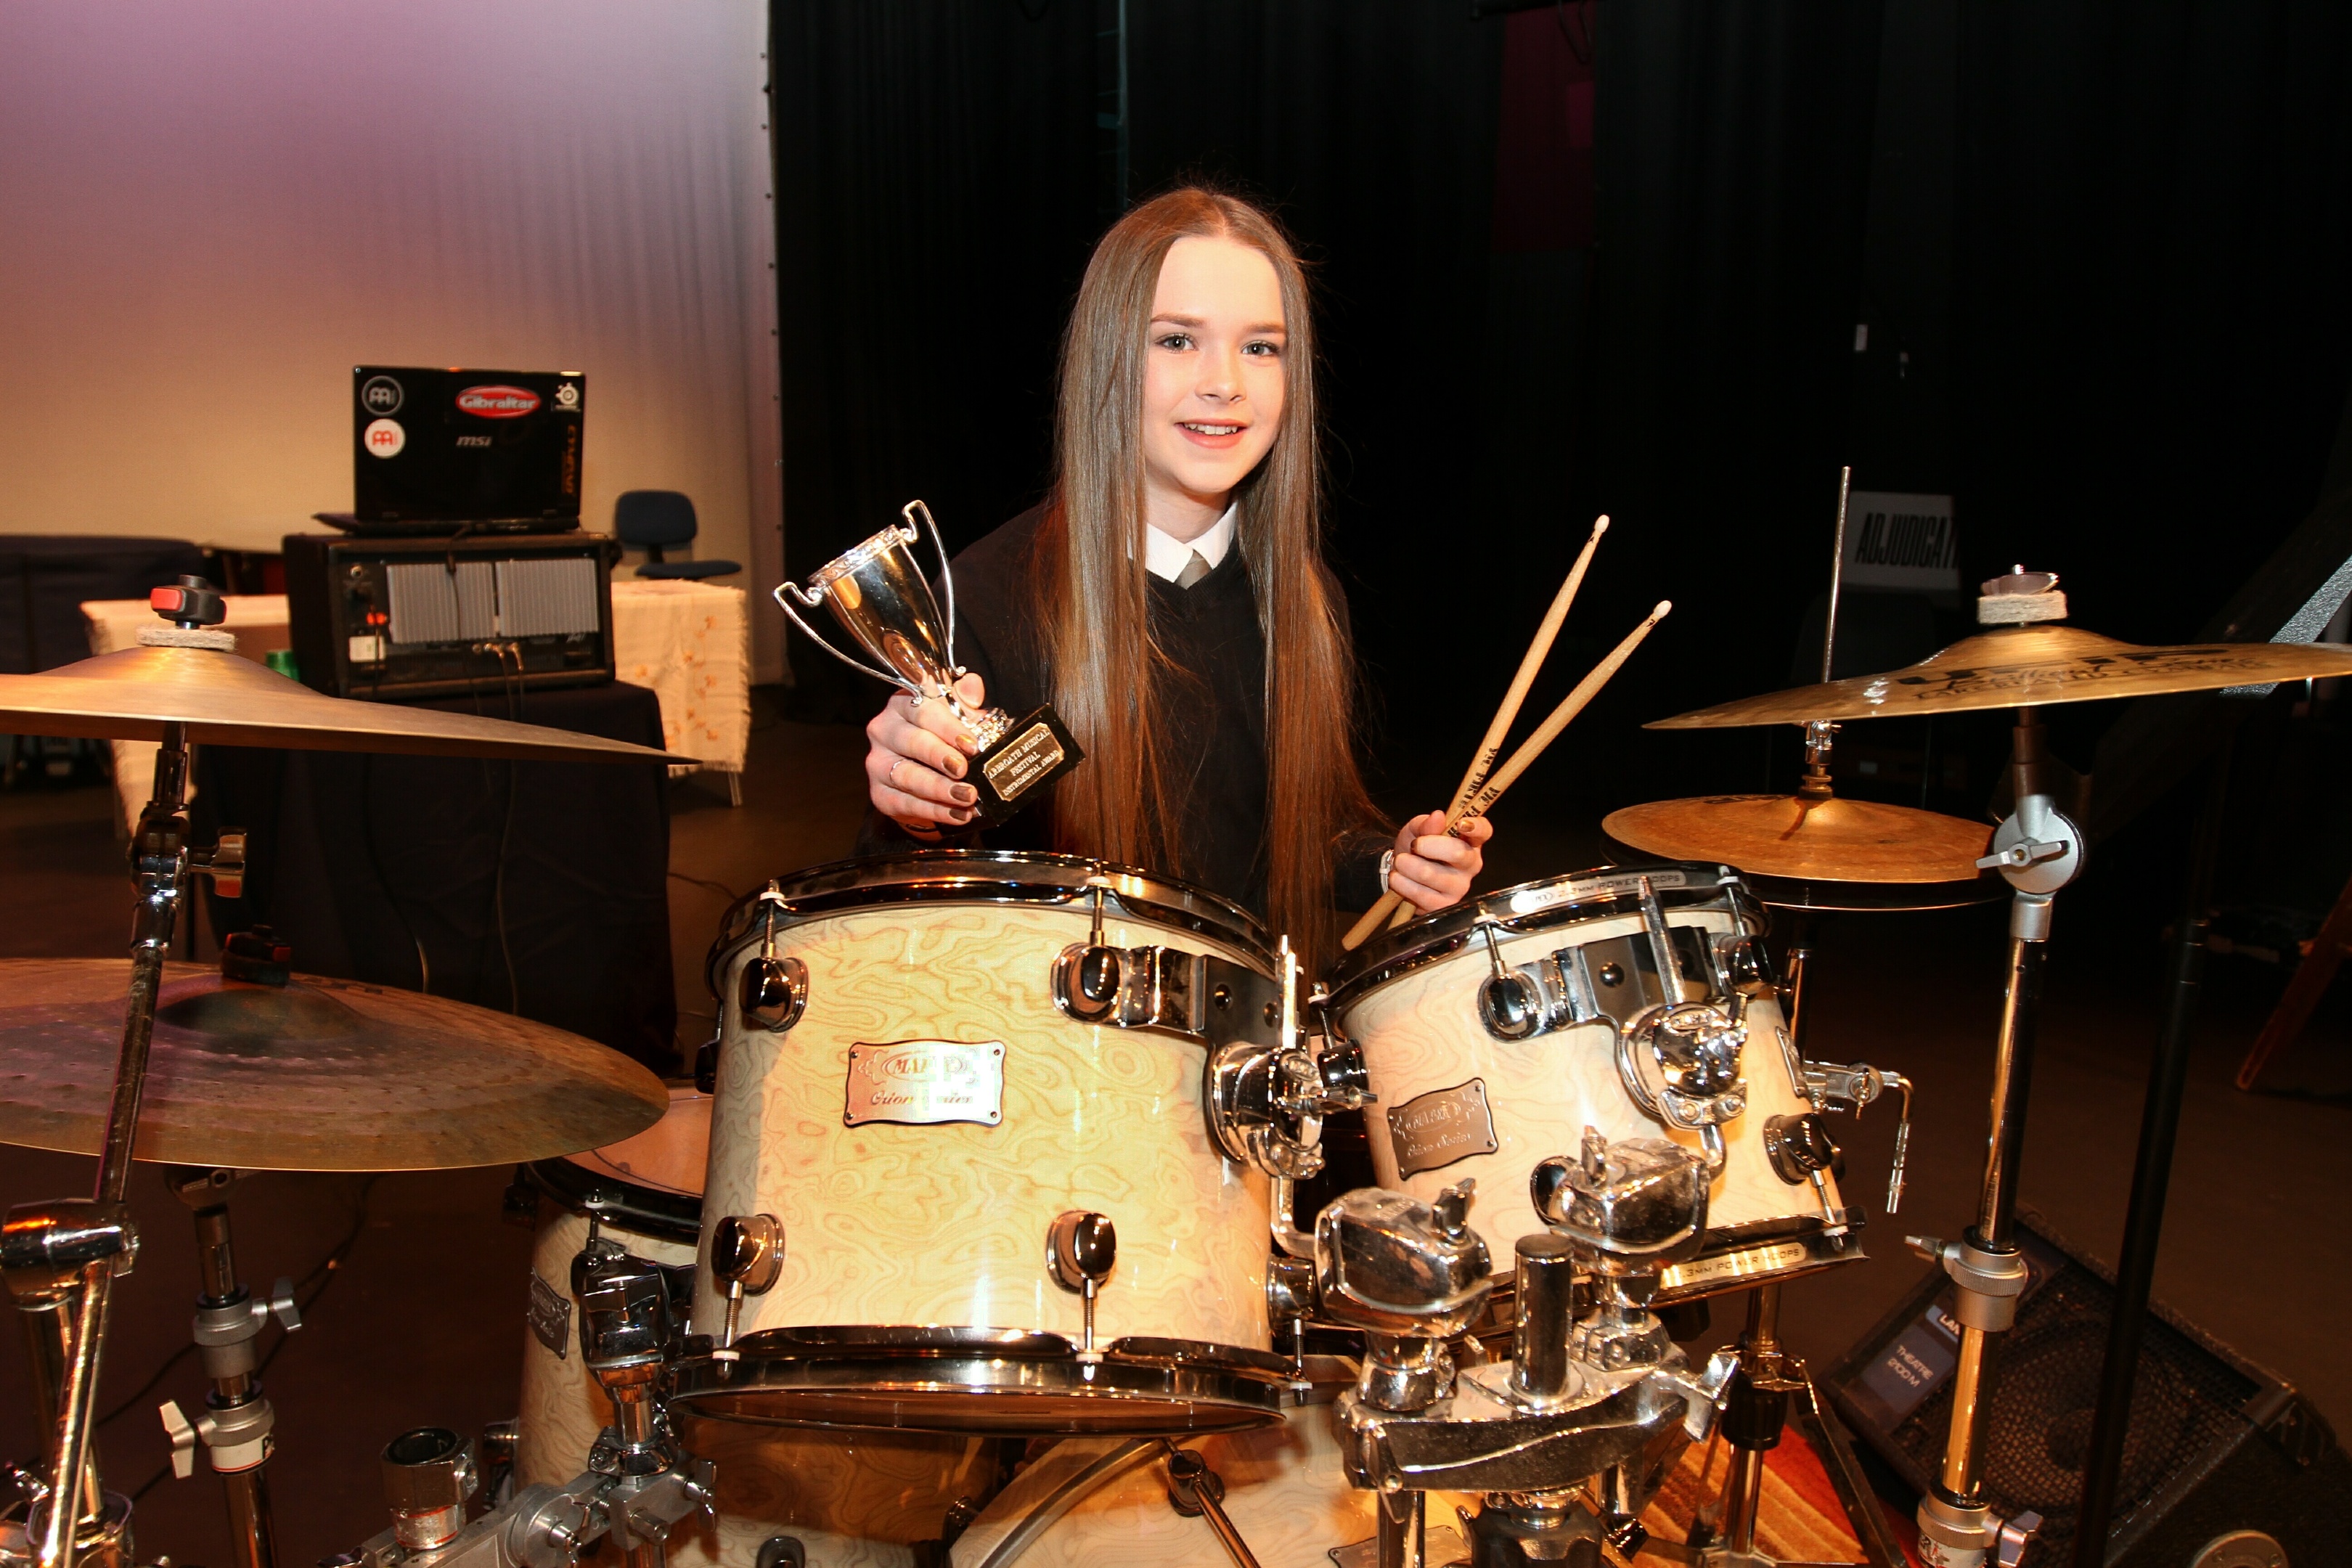 Ami Conchie  from Carnoustie High School was a winner this year.